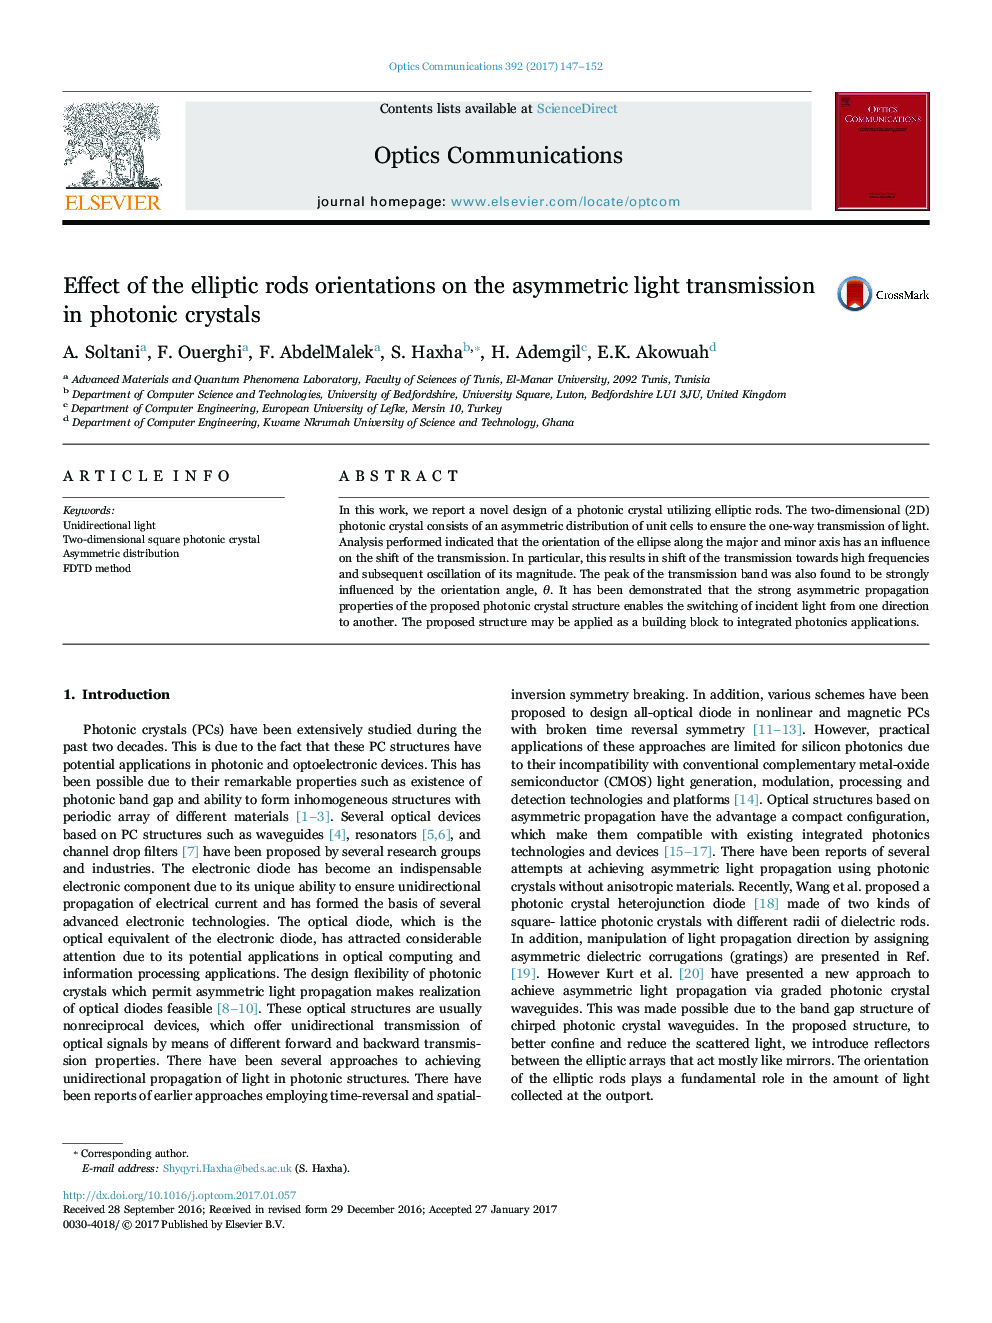 Effect of the elliptic rods orientations on the asymmetric light transmission in photonic crystals